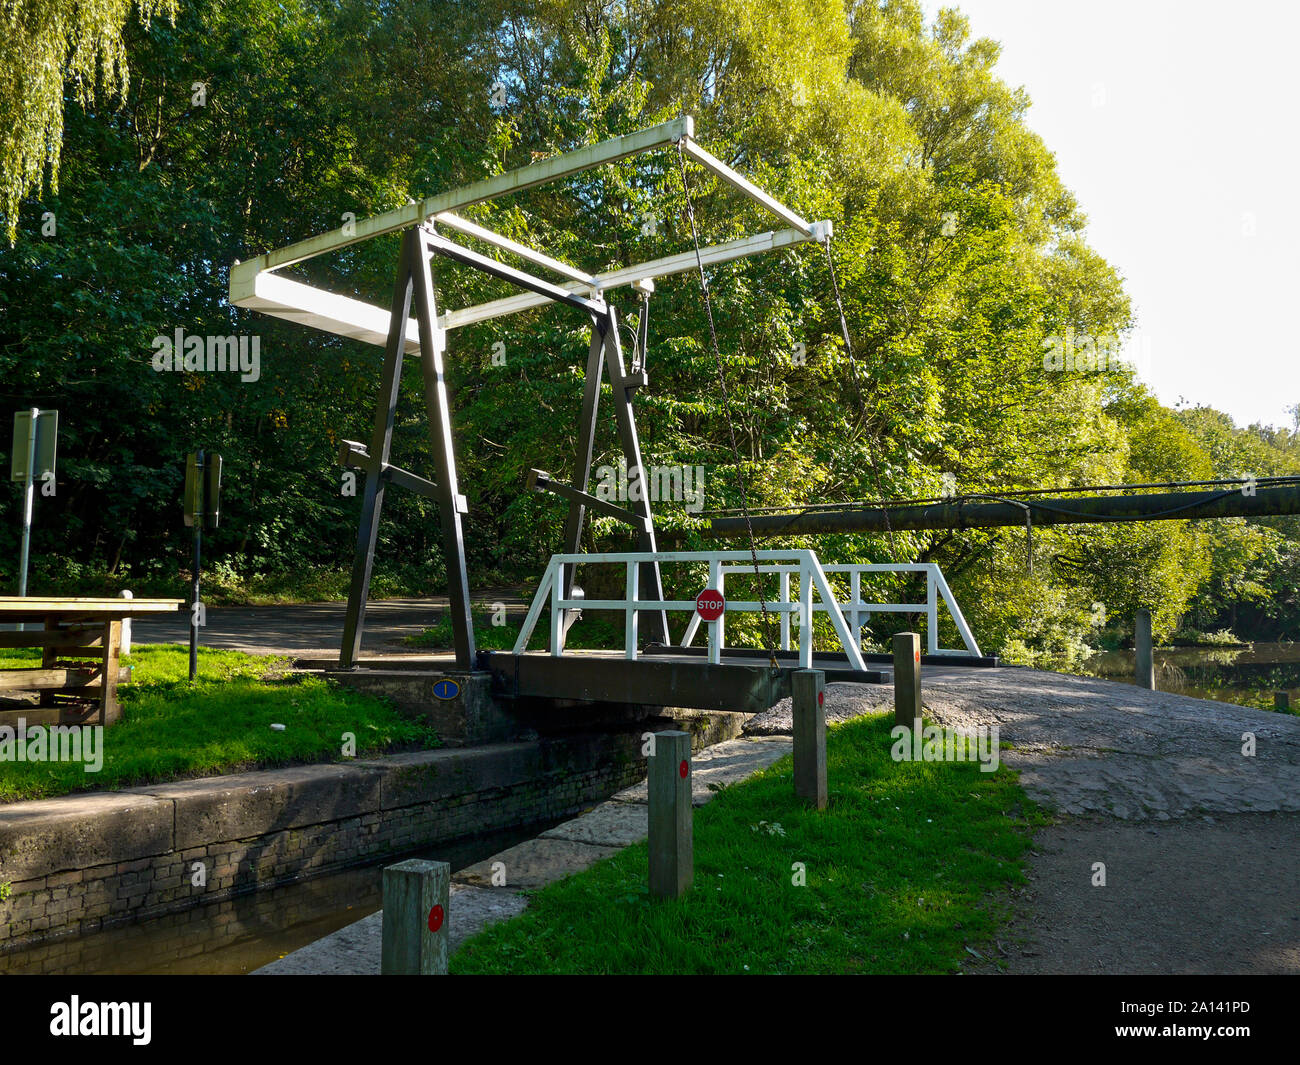 An bascule lifting bridge on the Peak Forest Canal, Dukinfield, Tameside, Manchester, UK Stock Photo